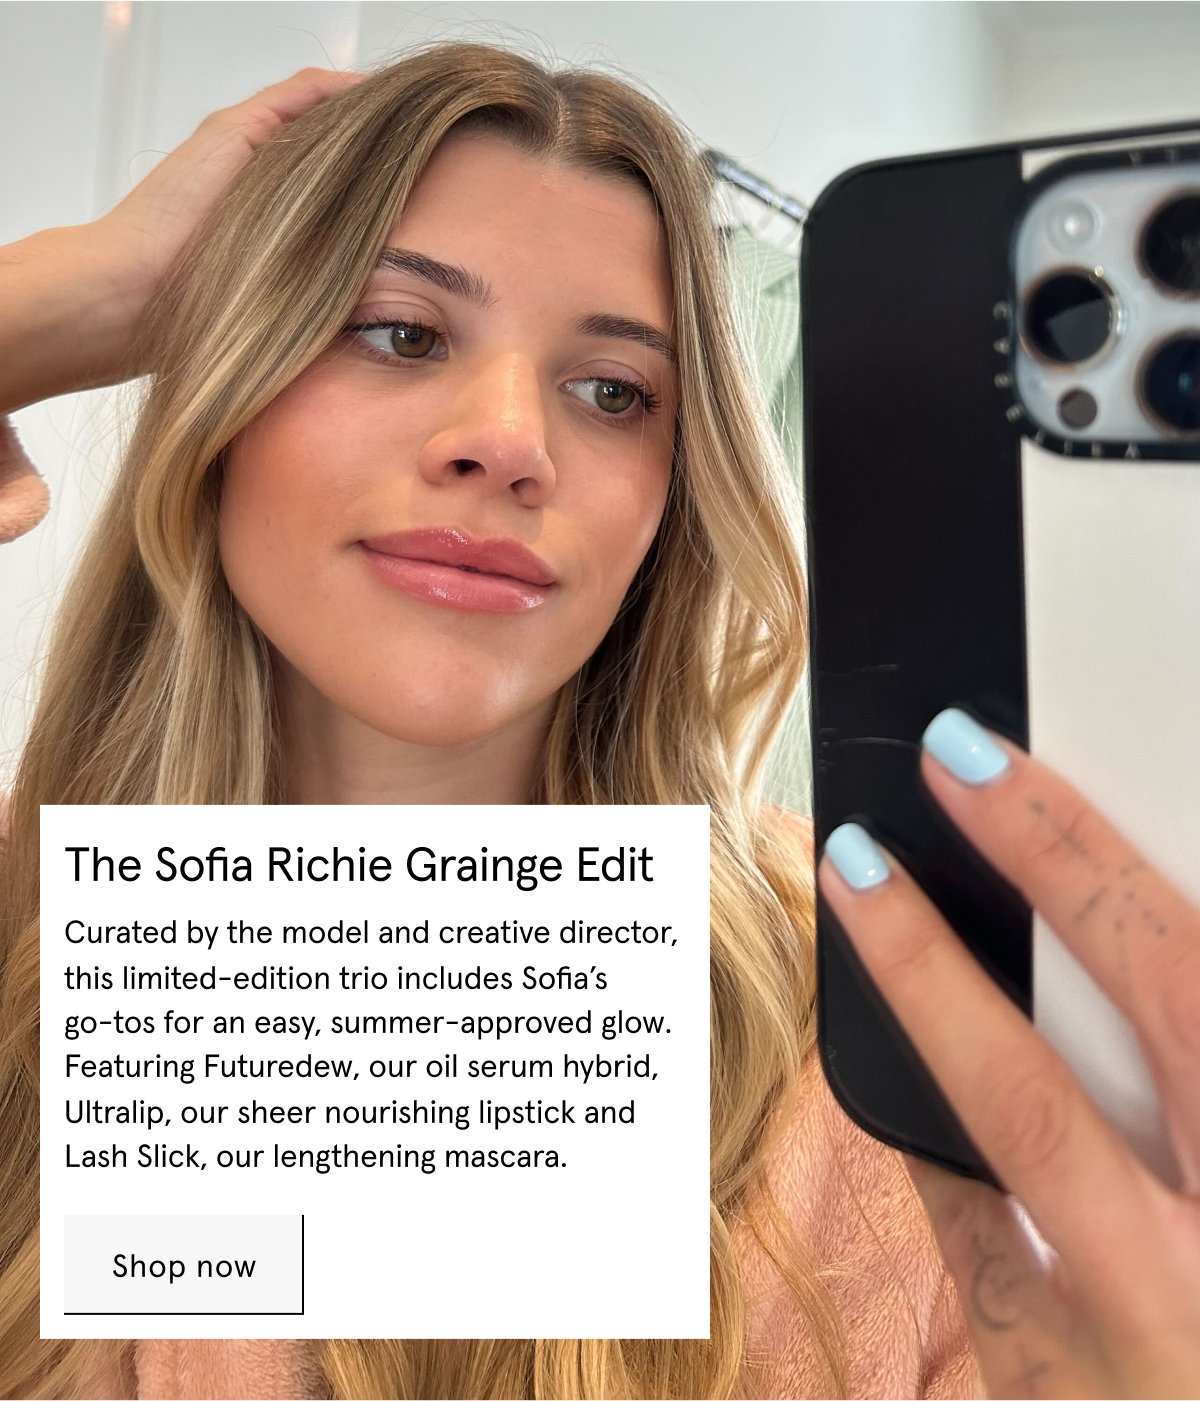 Sofia Richie's beauty routine is ridiculously mesmerizing